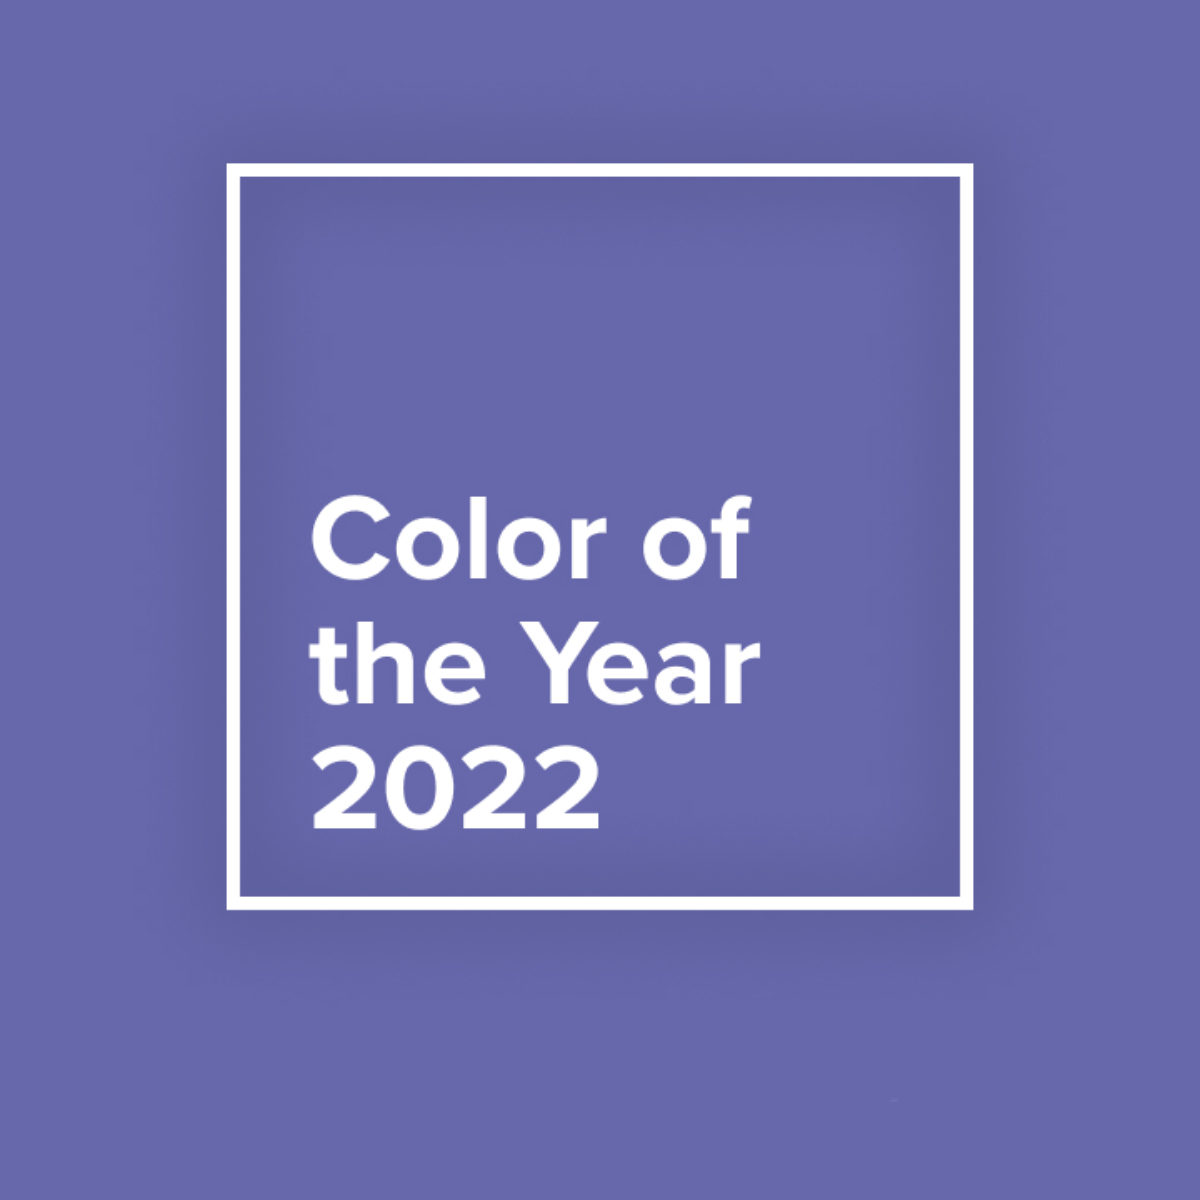 Collection 96+ Images 2022 pantone color of the year flowers Latest